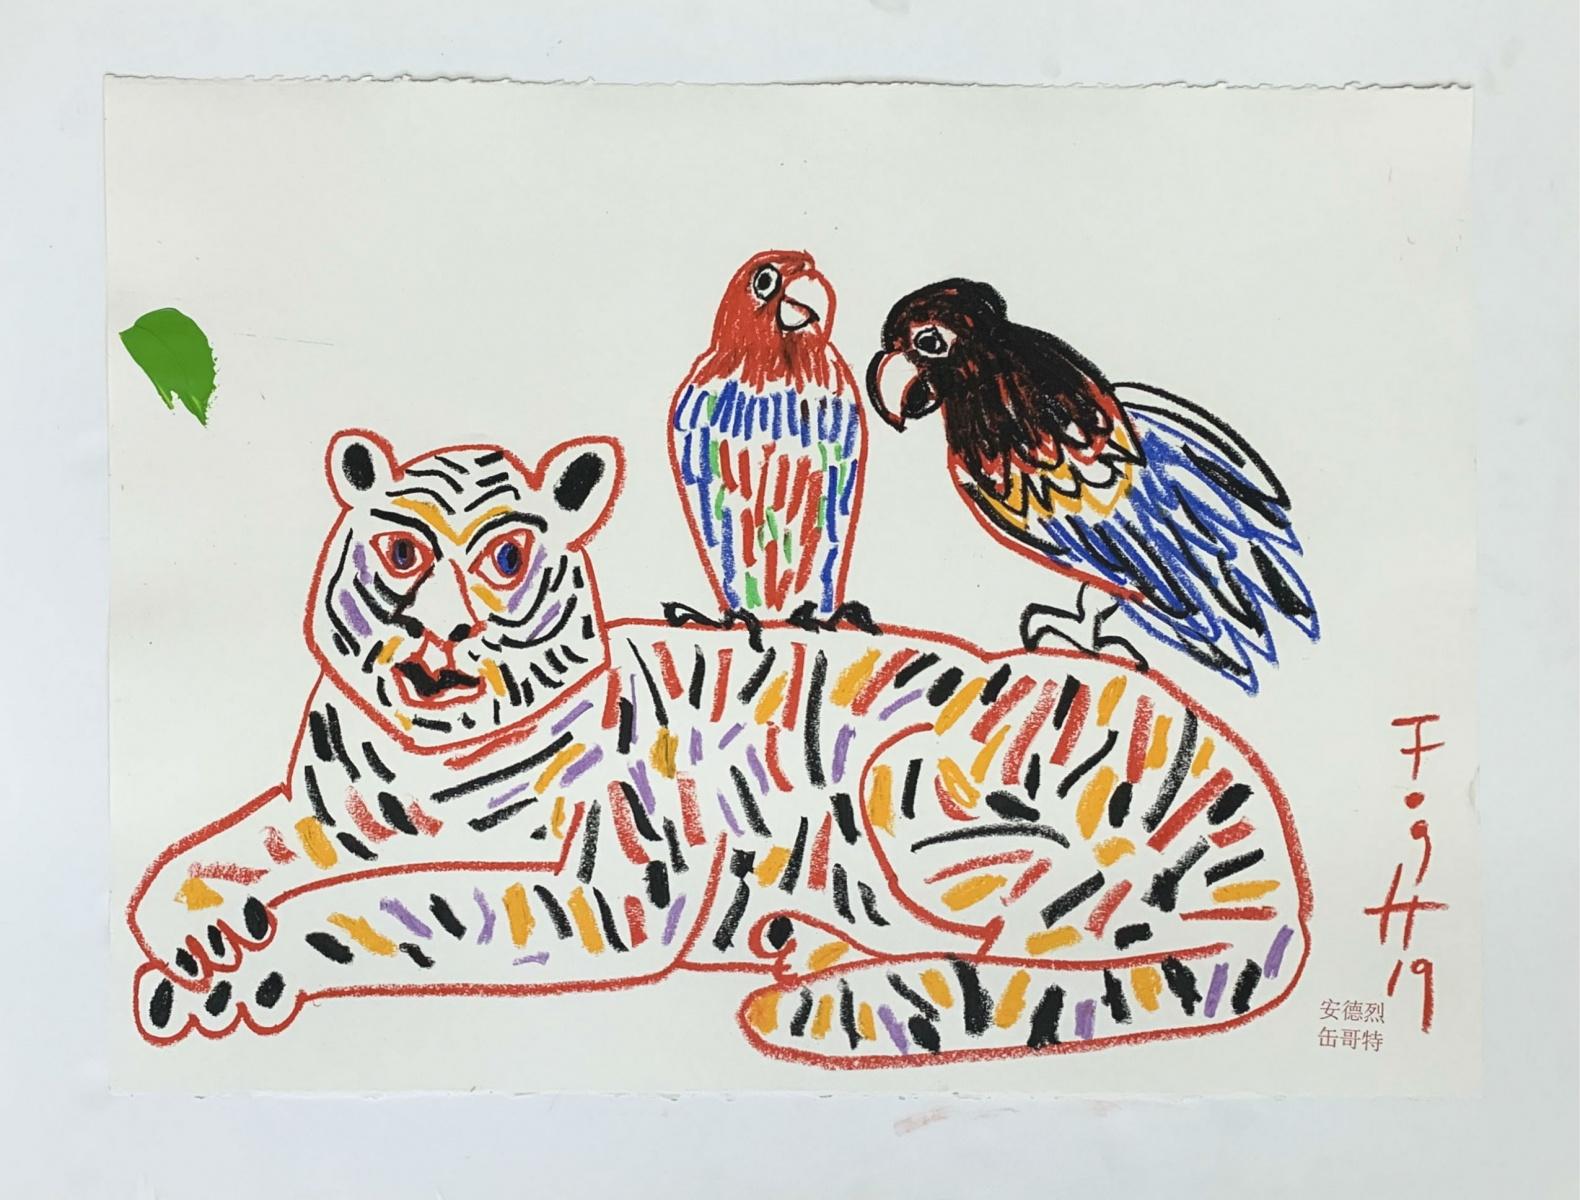 Parrots on tiger  - Polish Master Of Art, Pastels, Animals, Chinese zodiac sign - Painting by Andrzej Fogtt